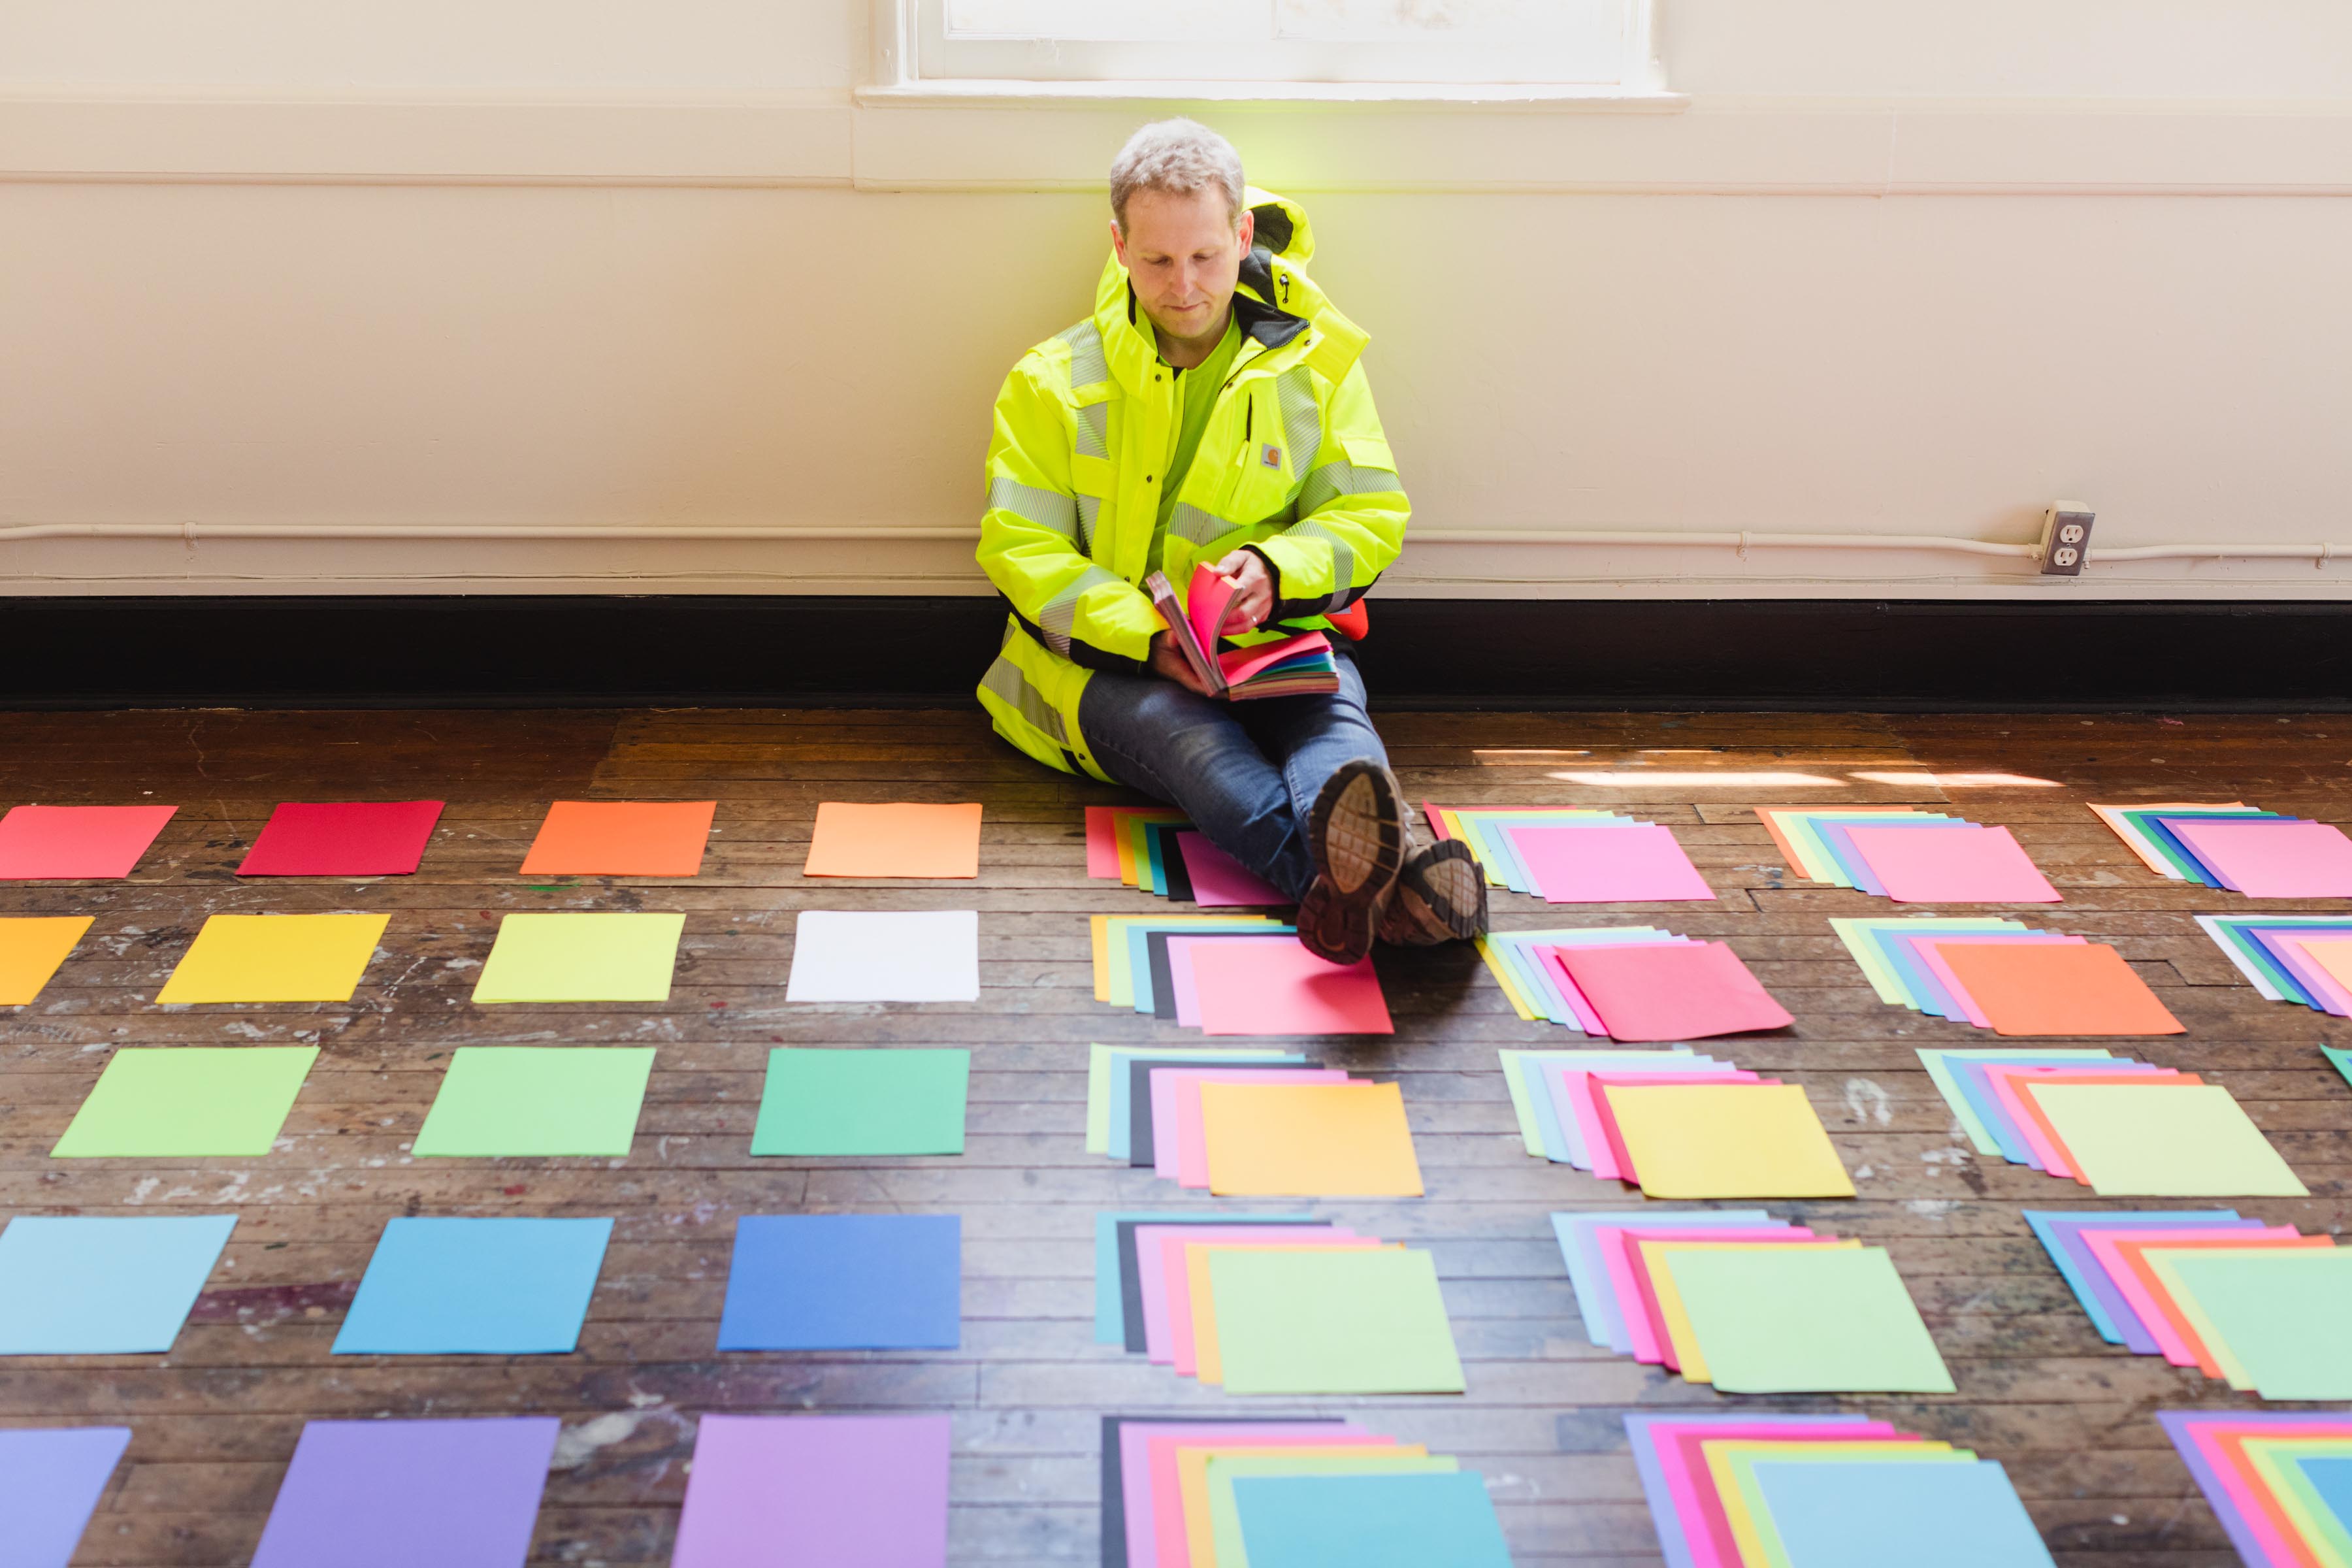 A person wearing a limegreen, high-visibility jacket sits on the floor. The person is flipping-through a book of colorful neon papers. Small stacks of colorful neon papers cover the floor.